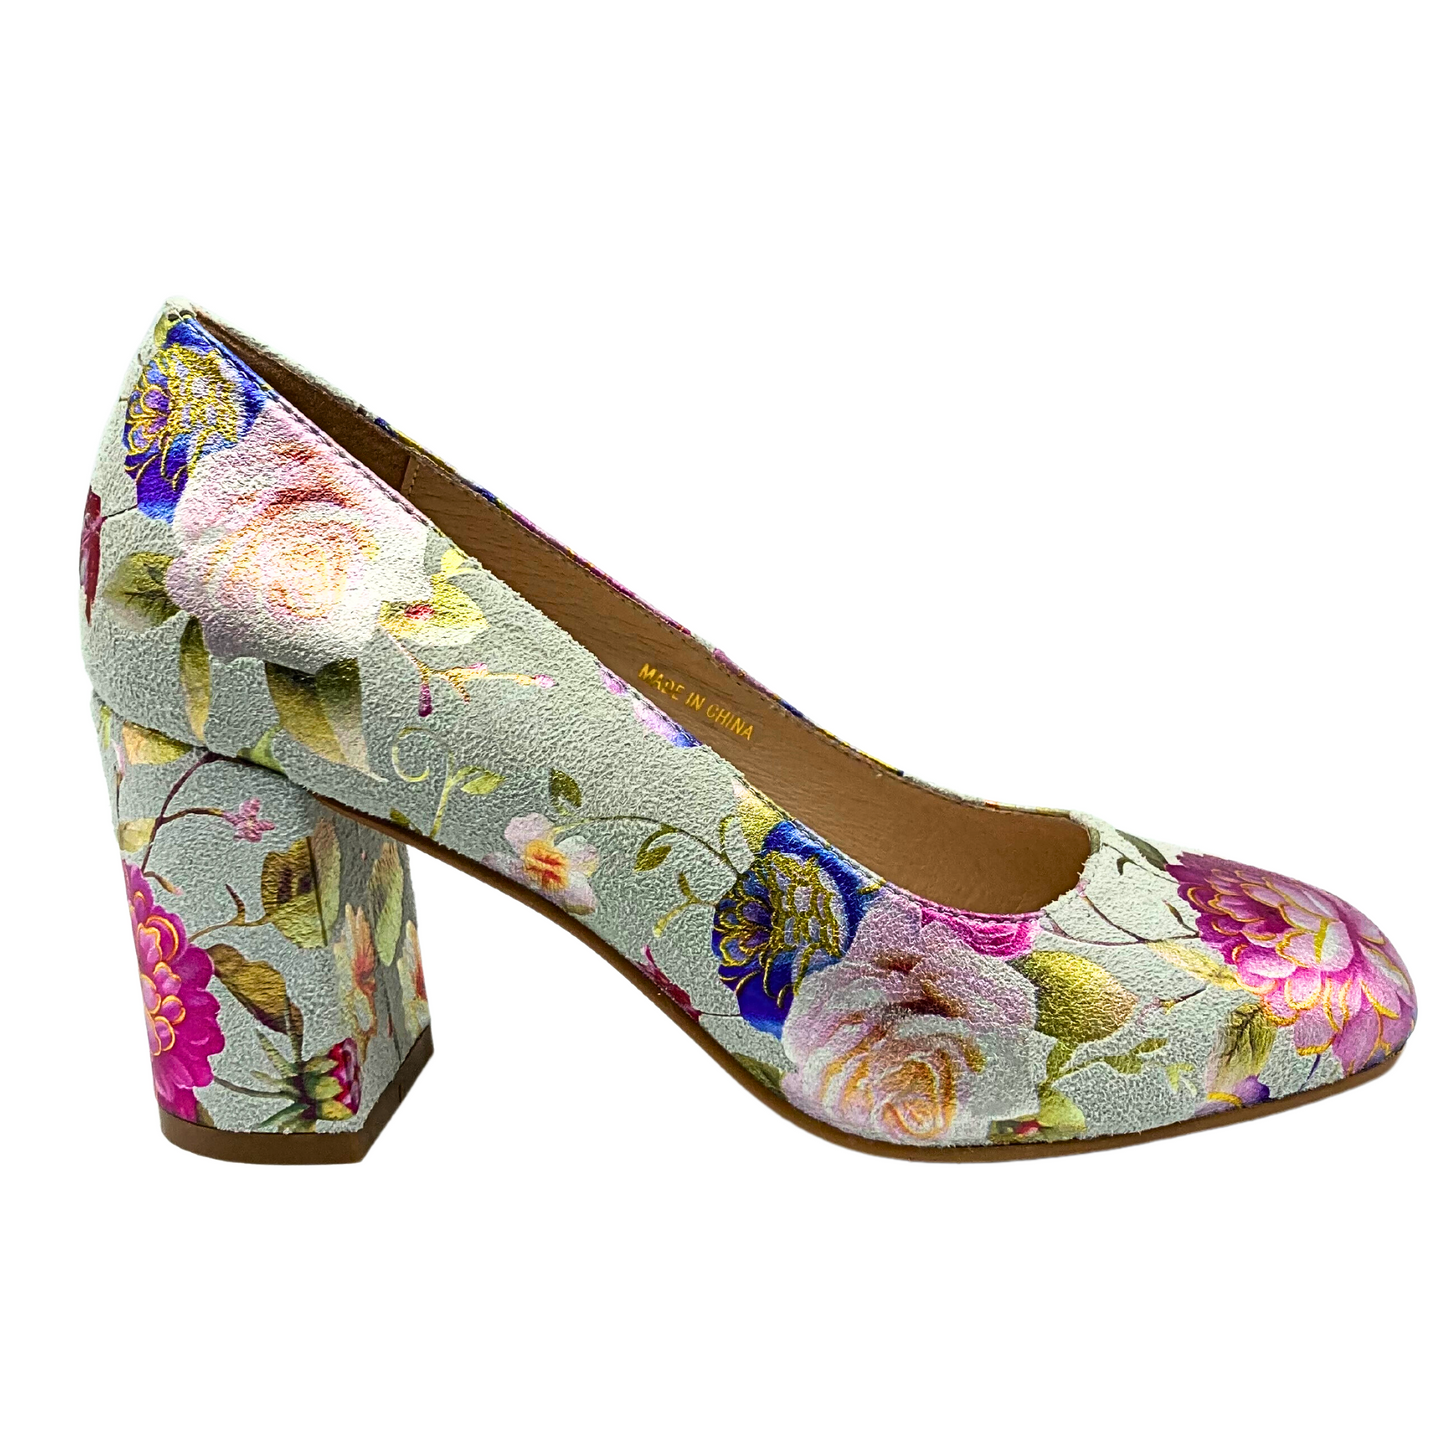 Outside view of a pump style shoe with a medium block heel.  Creamy base color leather with painted, soft floral details